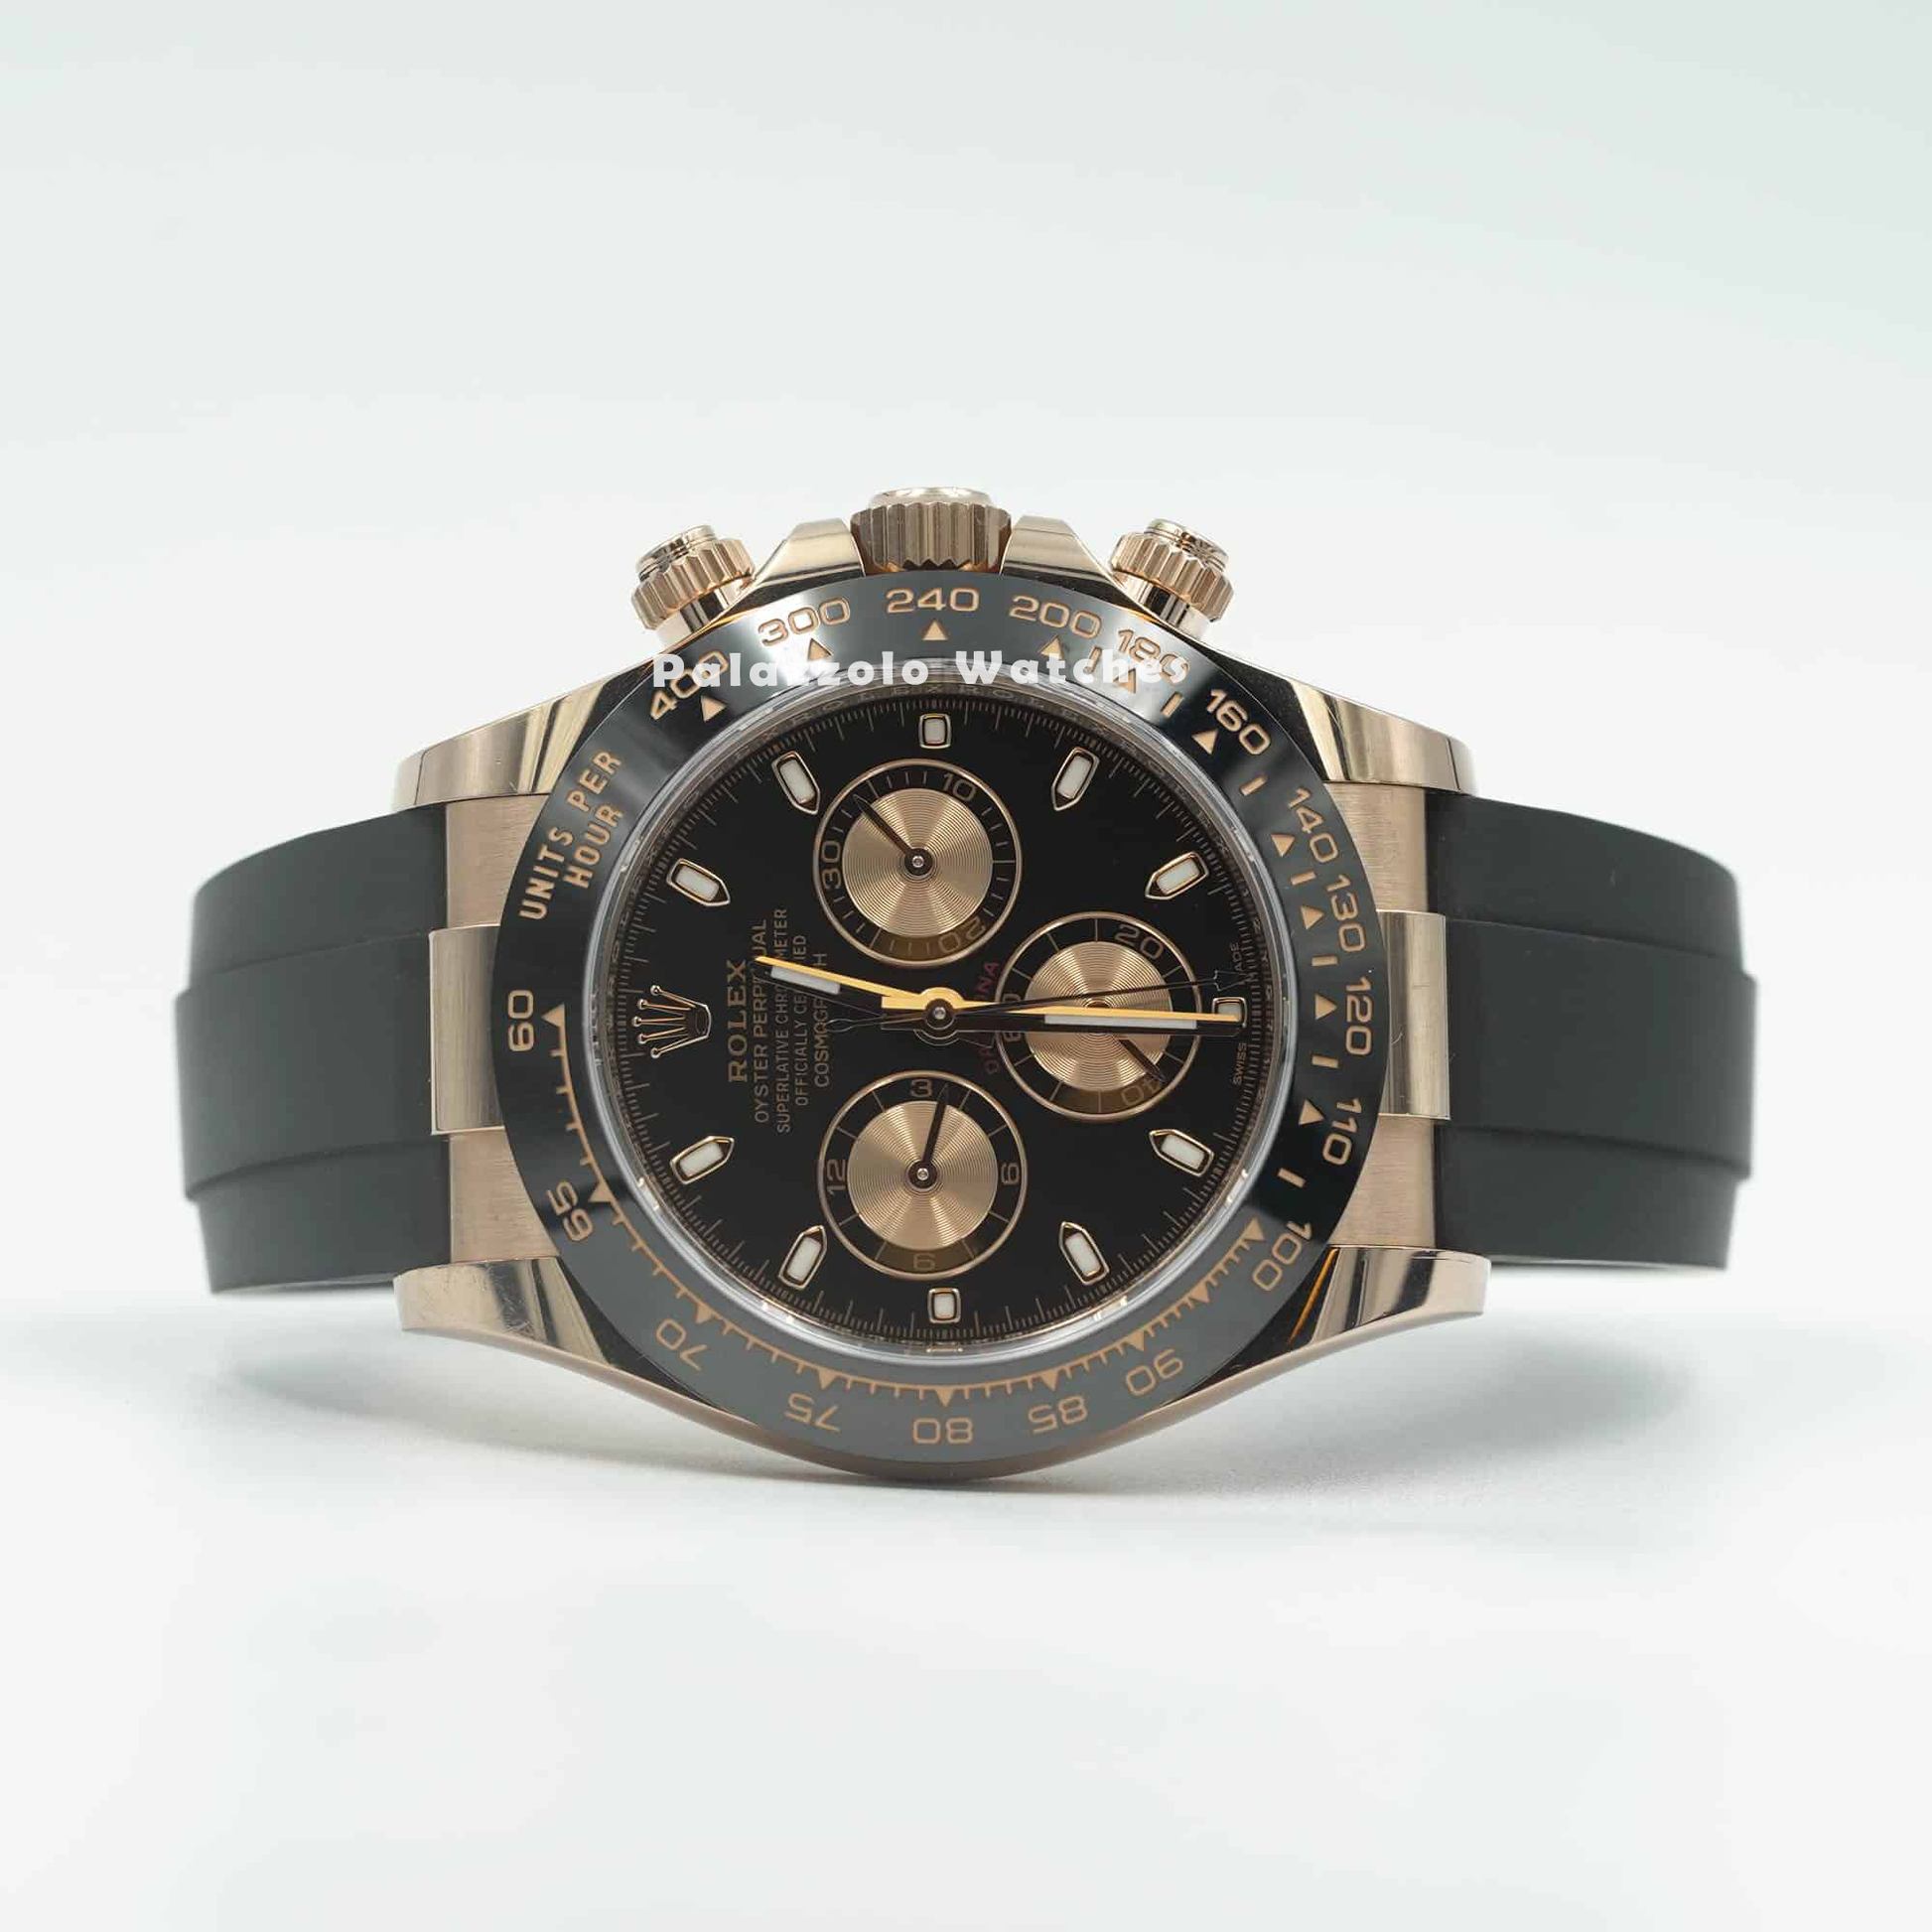 Rolex Cosmograph Daytona Everose Gold with Oysterflex bracelet - Palazzolo Watches